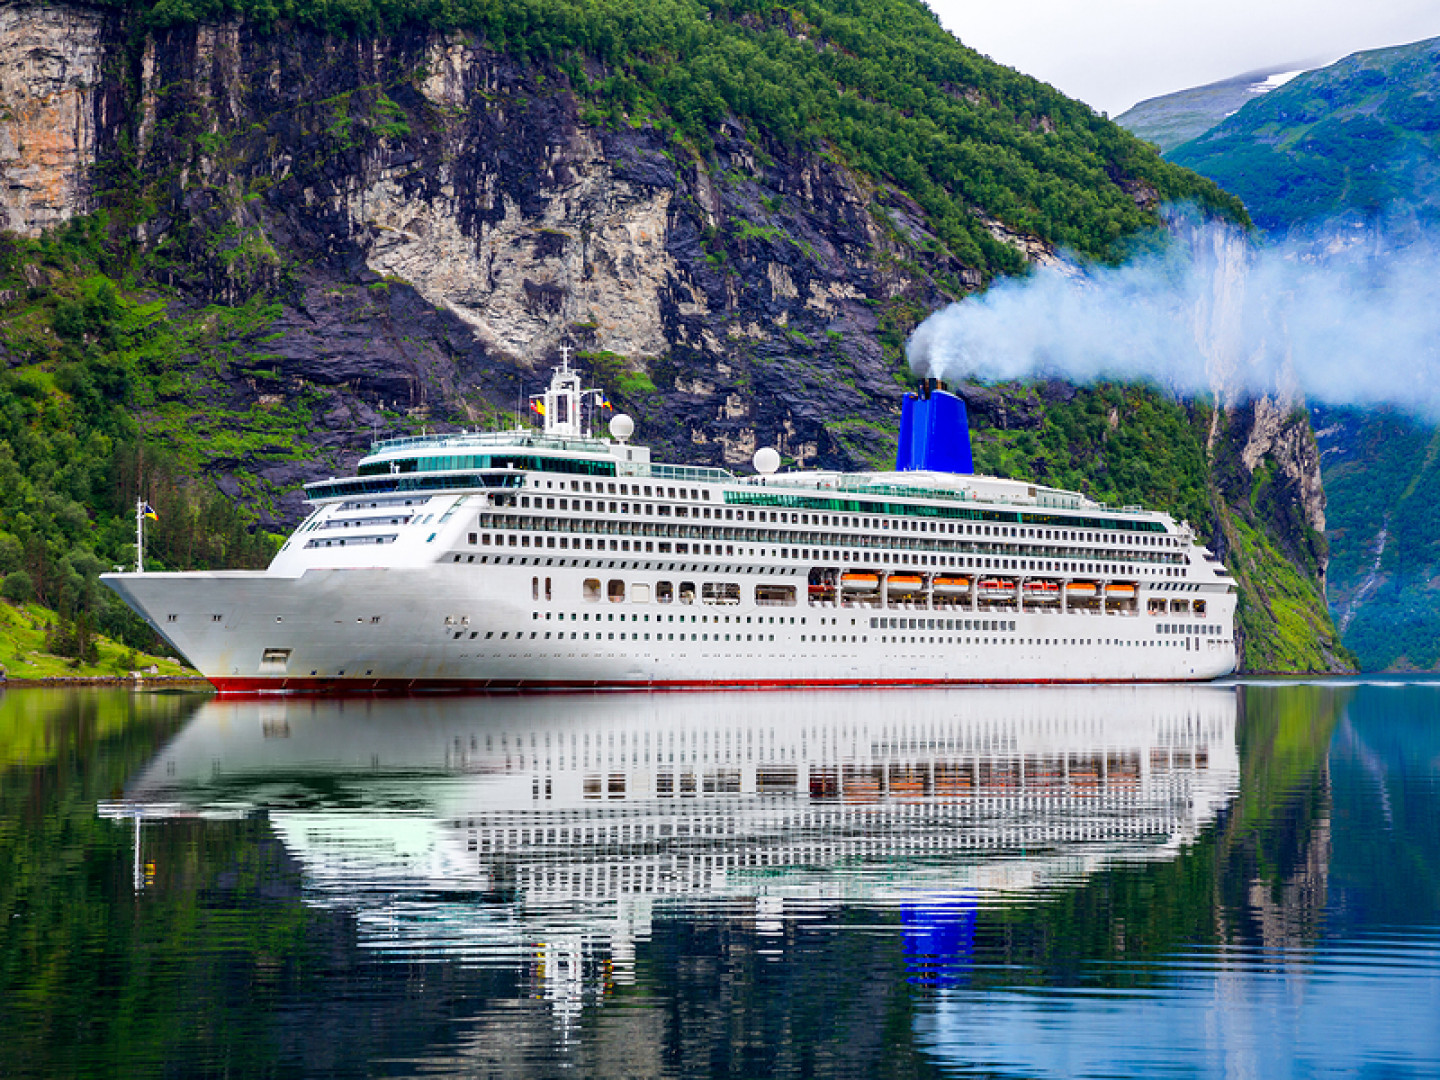 cruise tourism examples